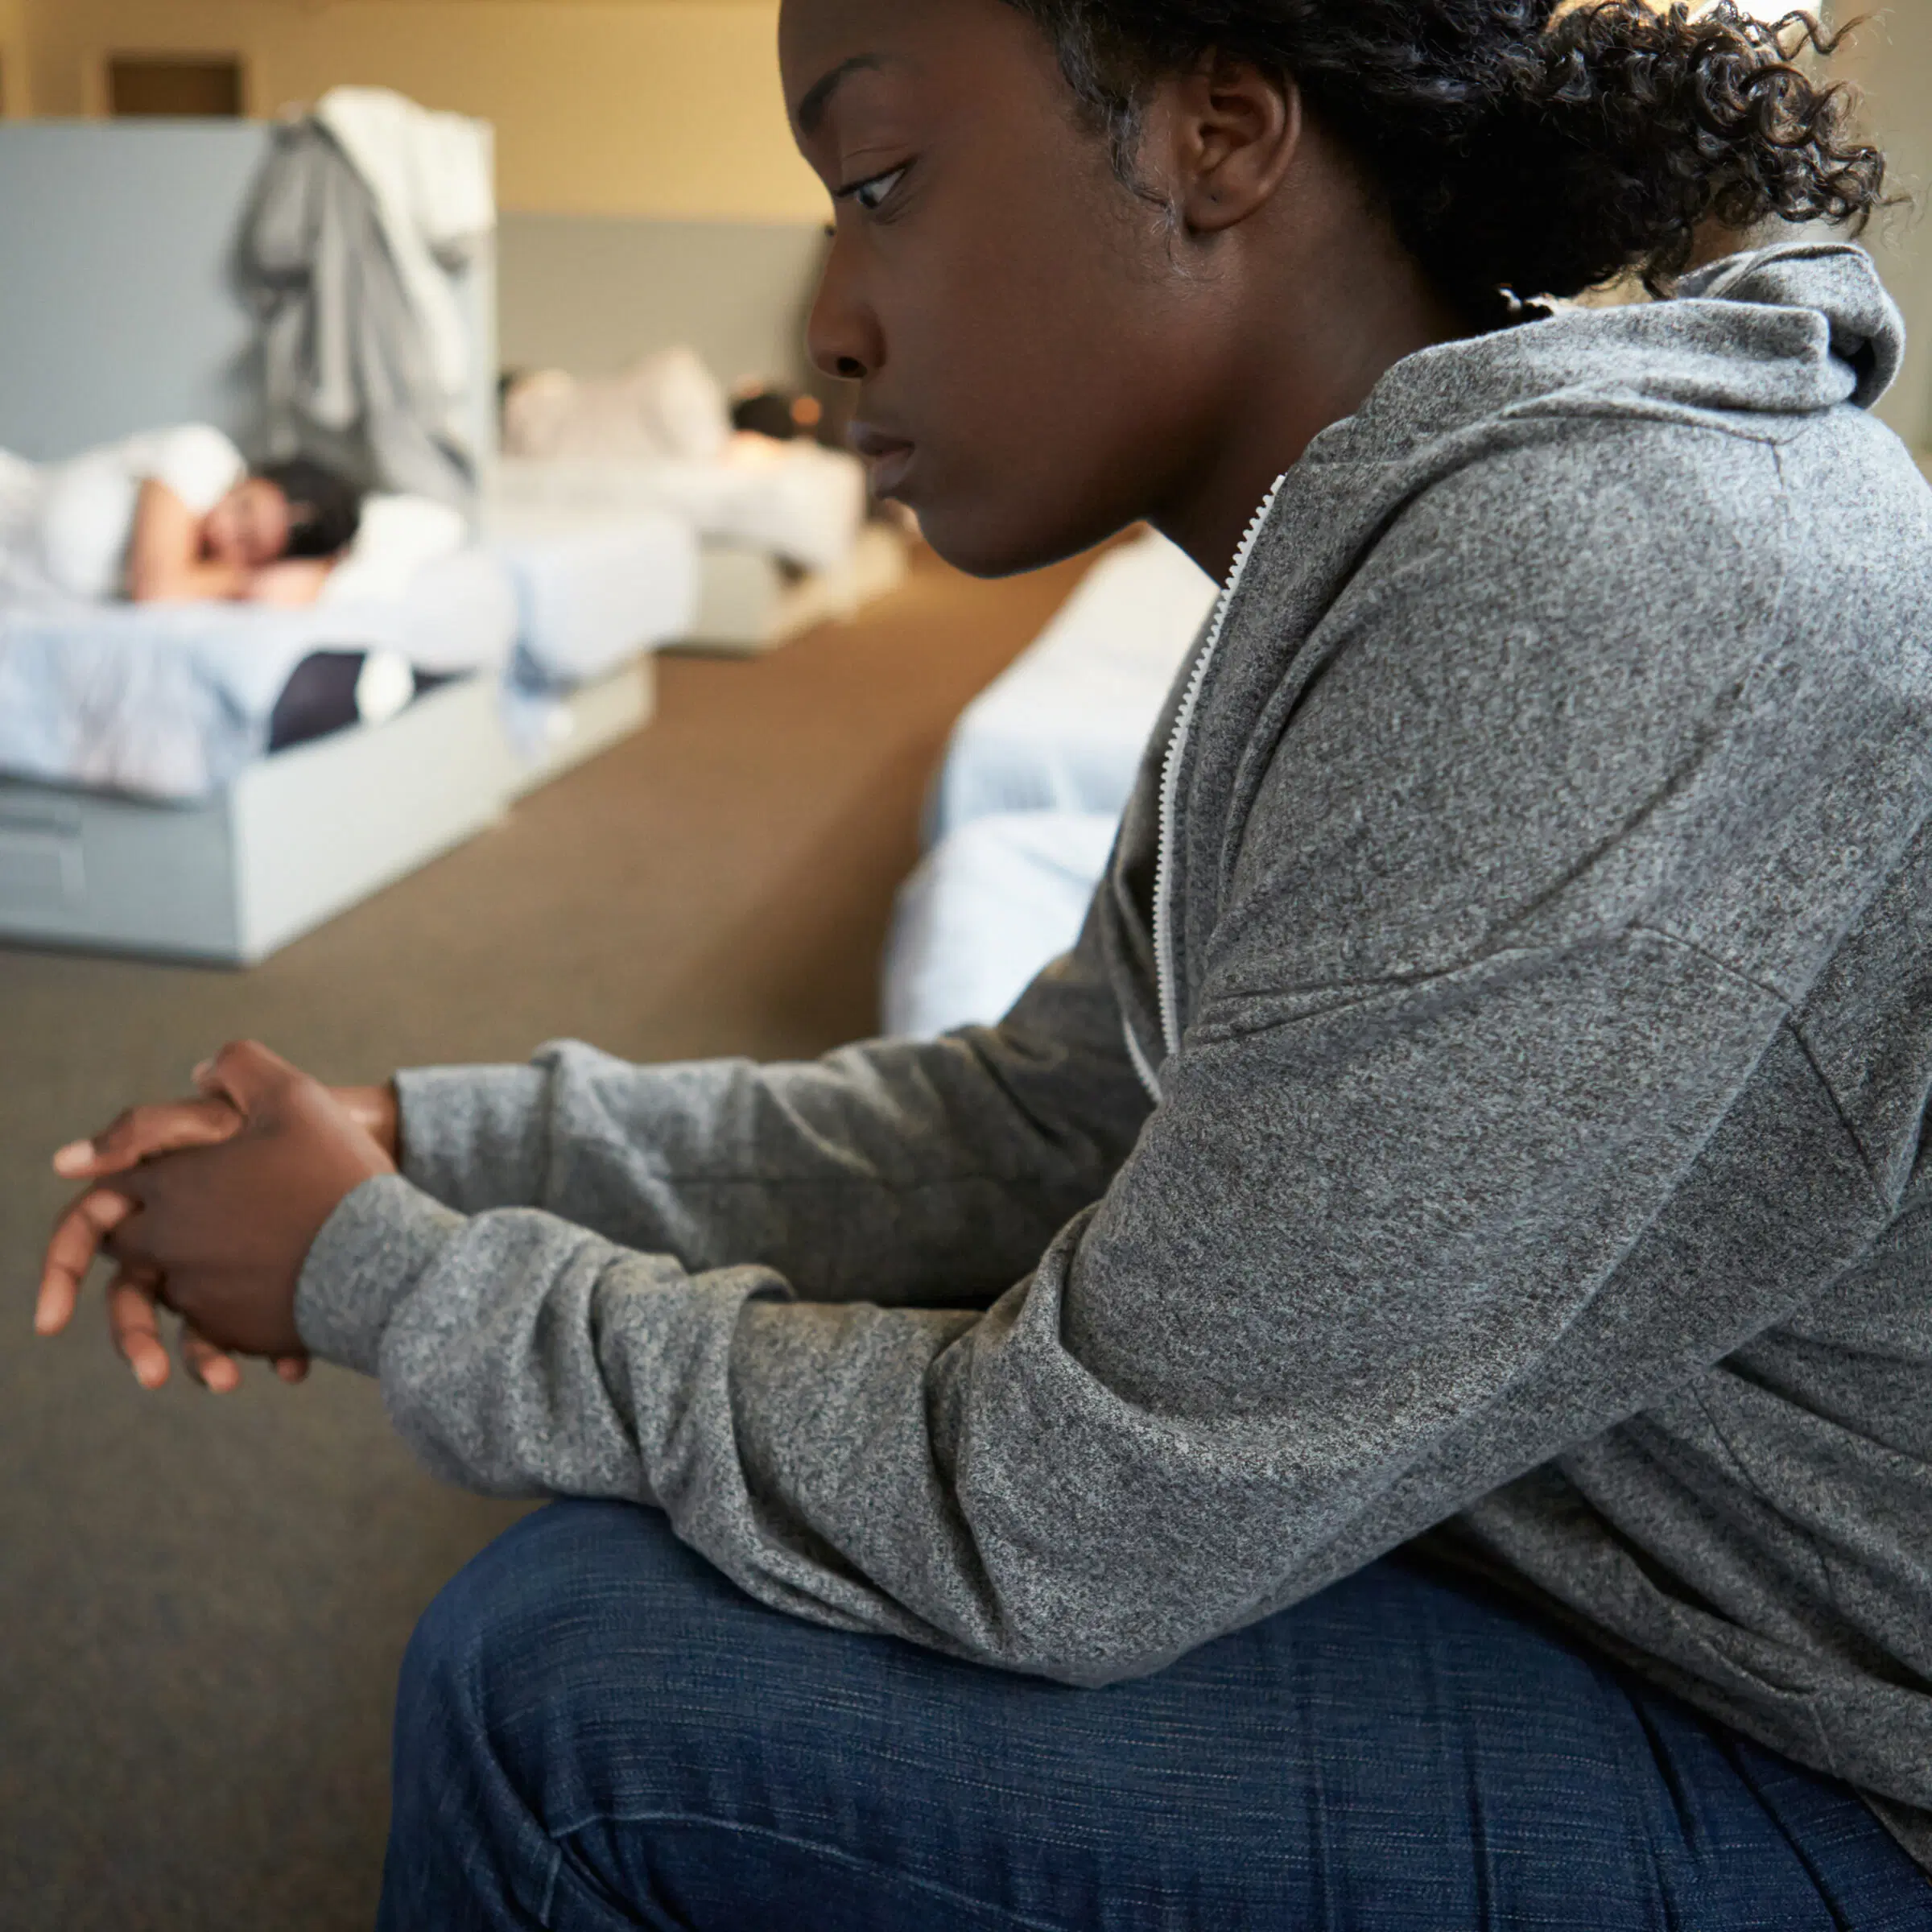 How can we better support people transitioning from homelessness to supportive housing?